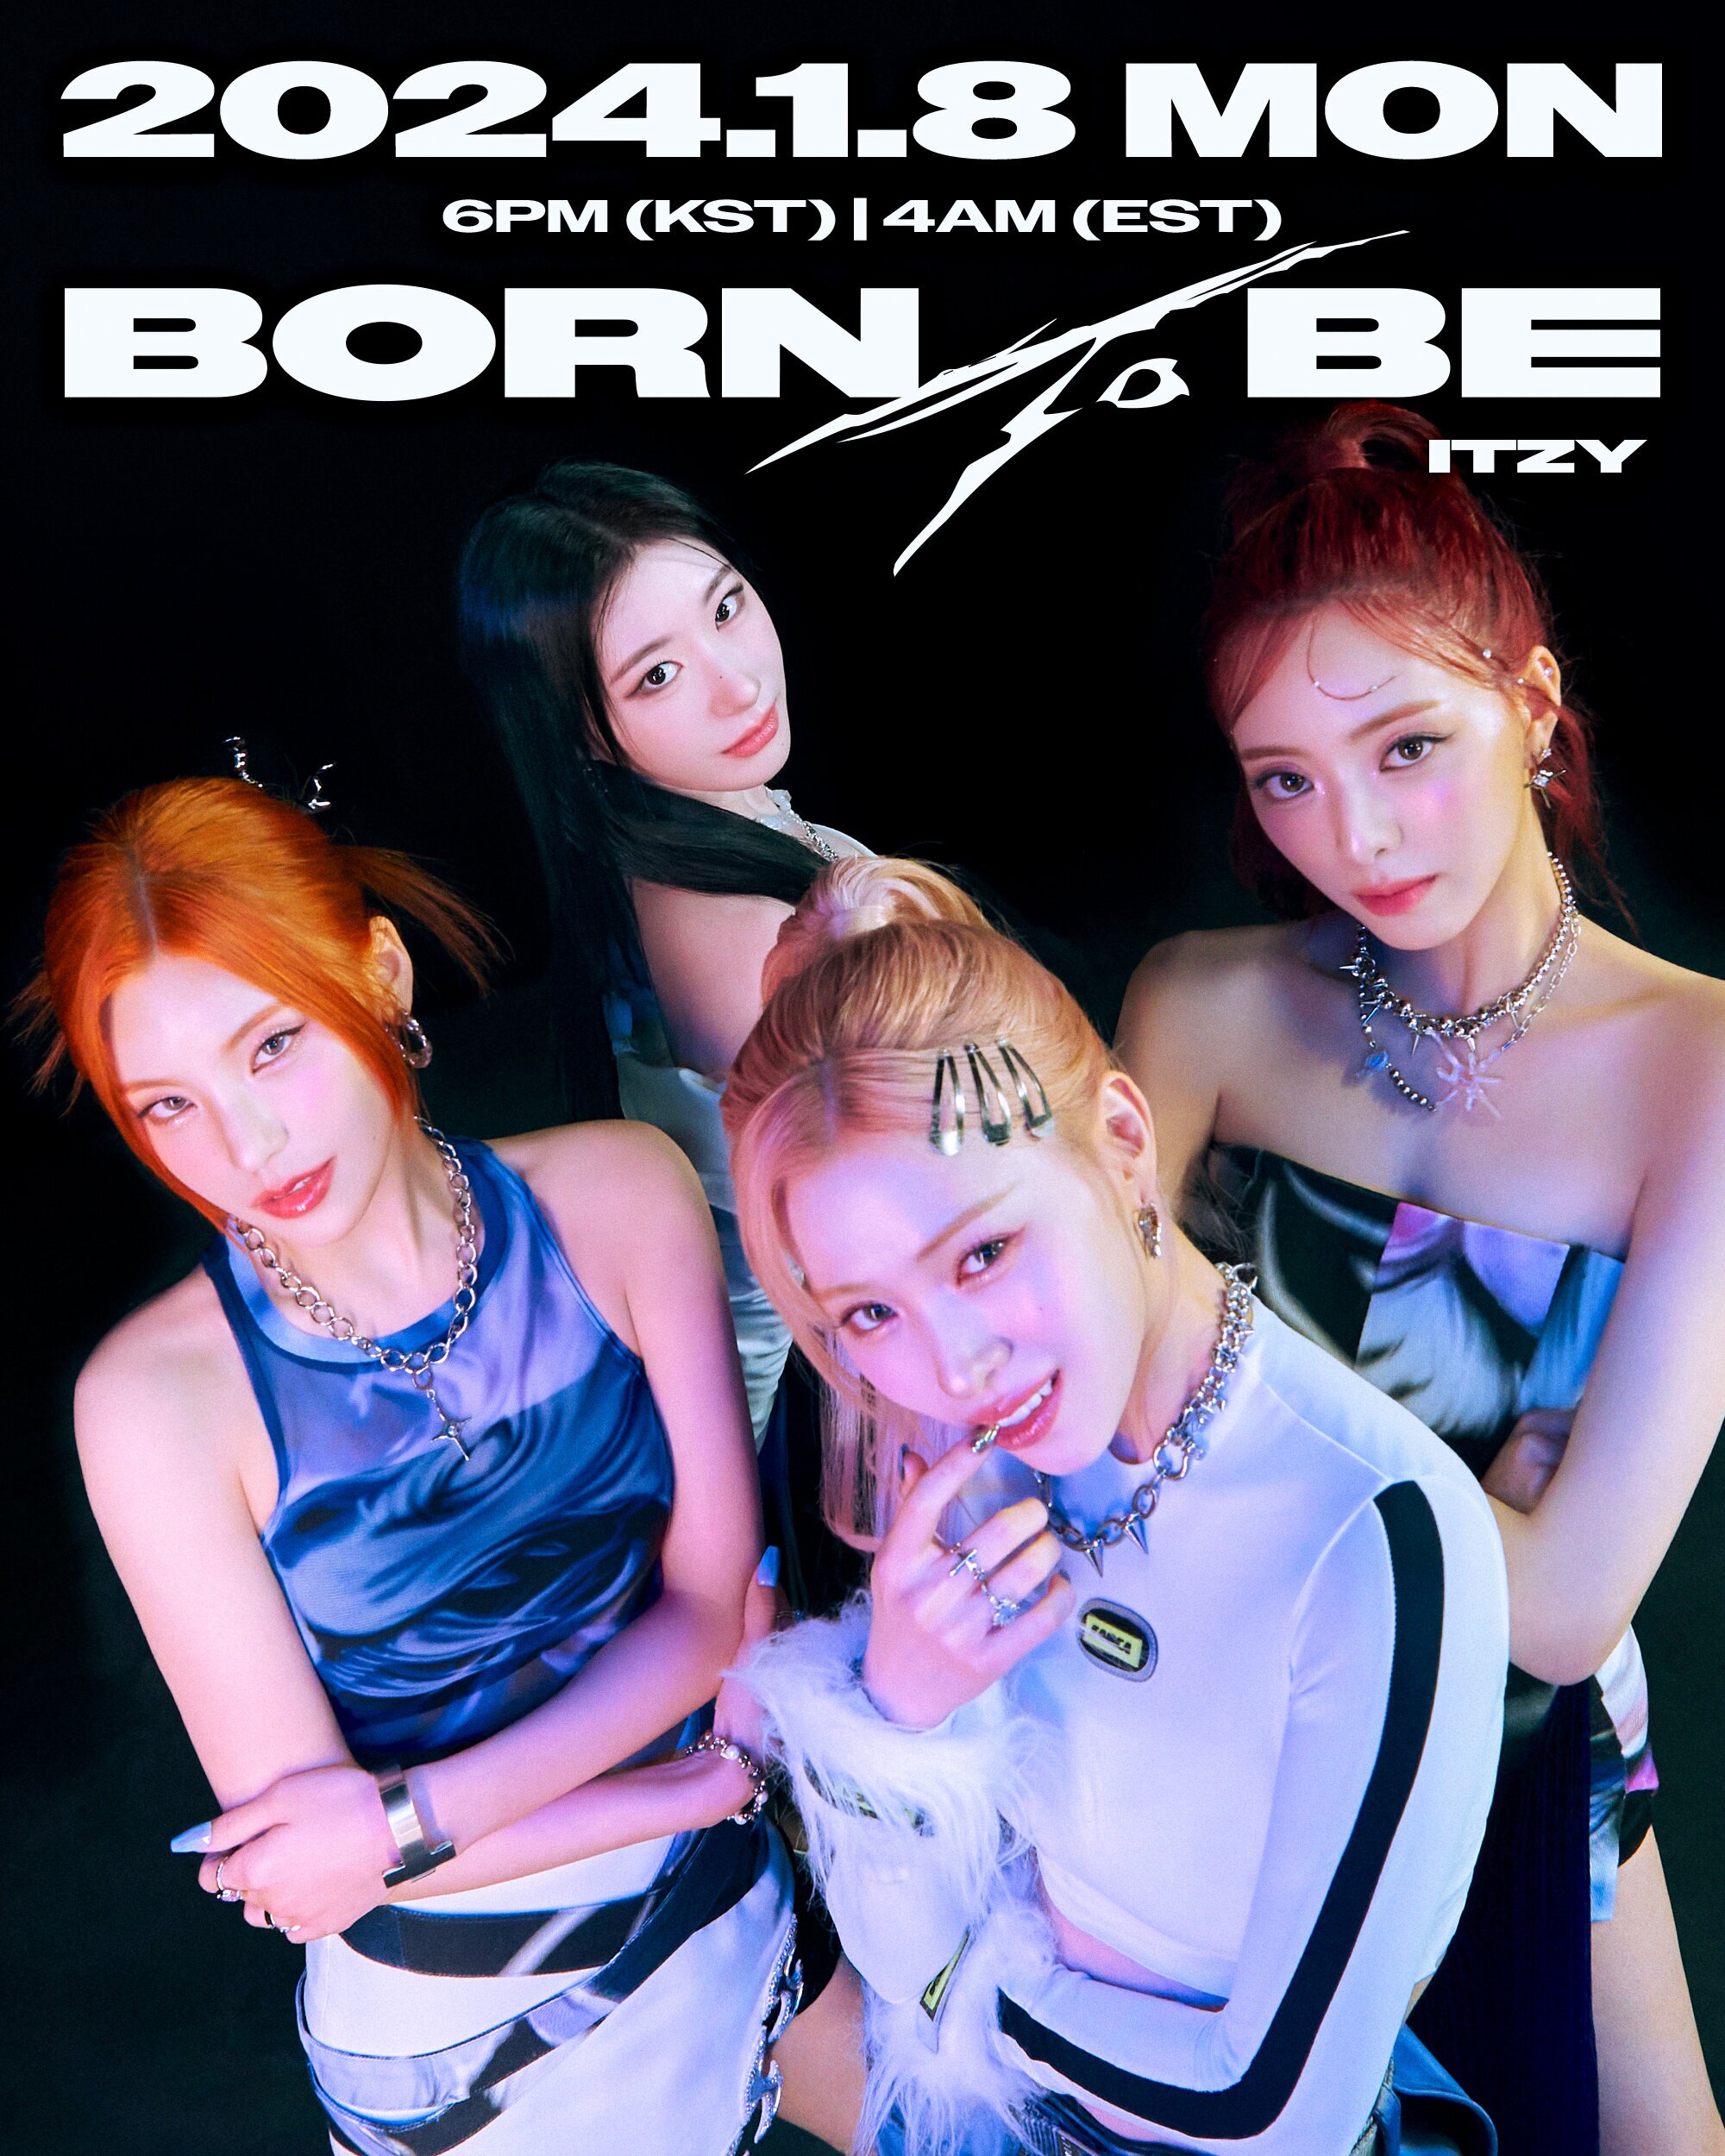 ITZY BORN TO BE ANNOUNCEMENT @ITZY 